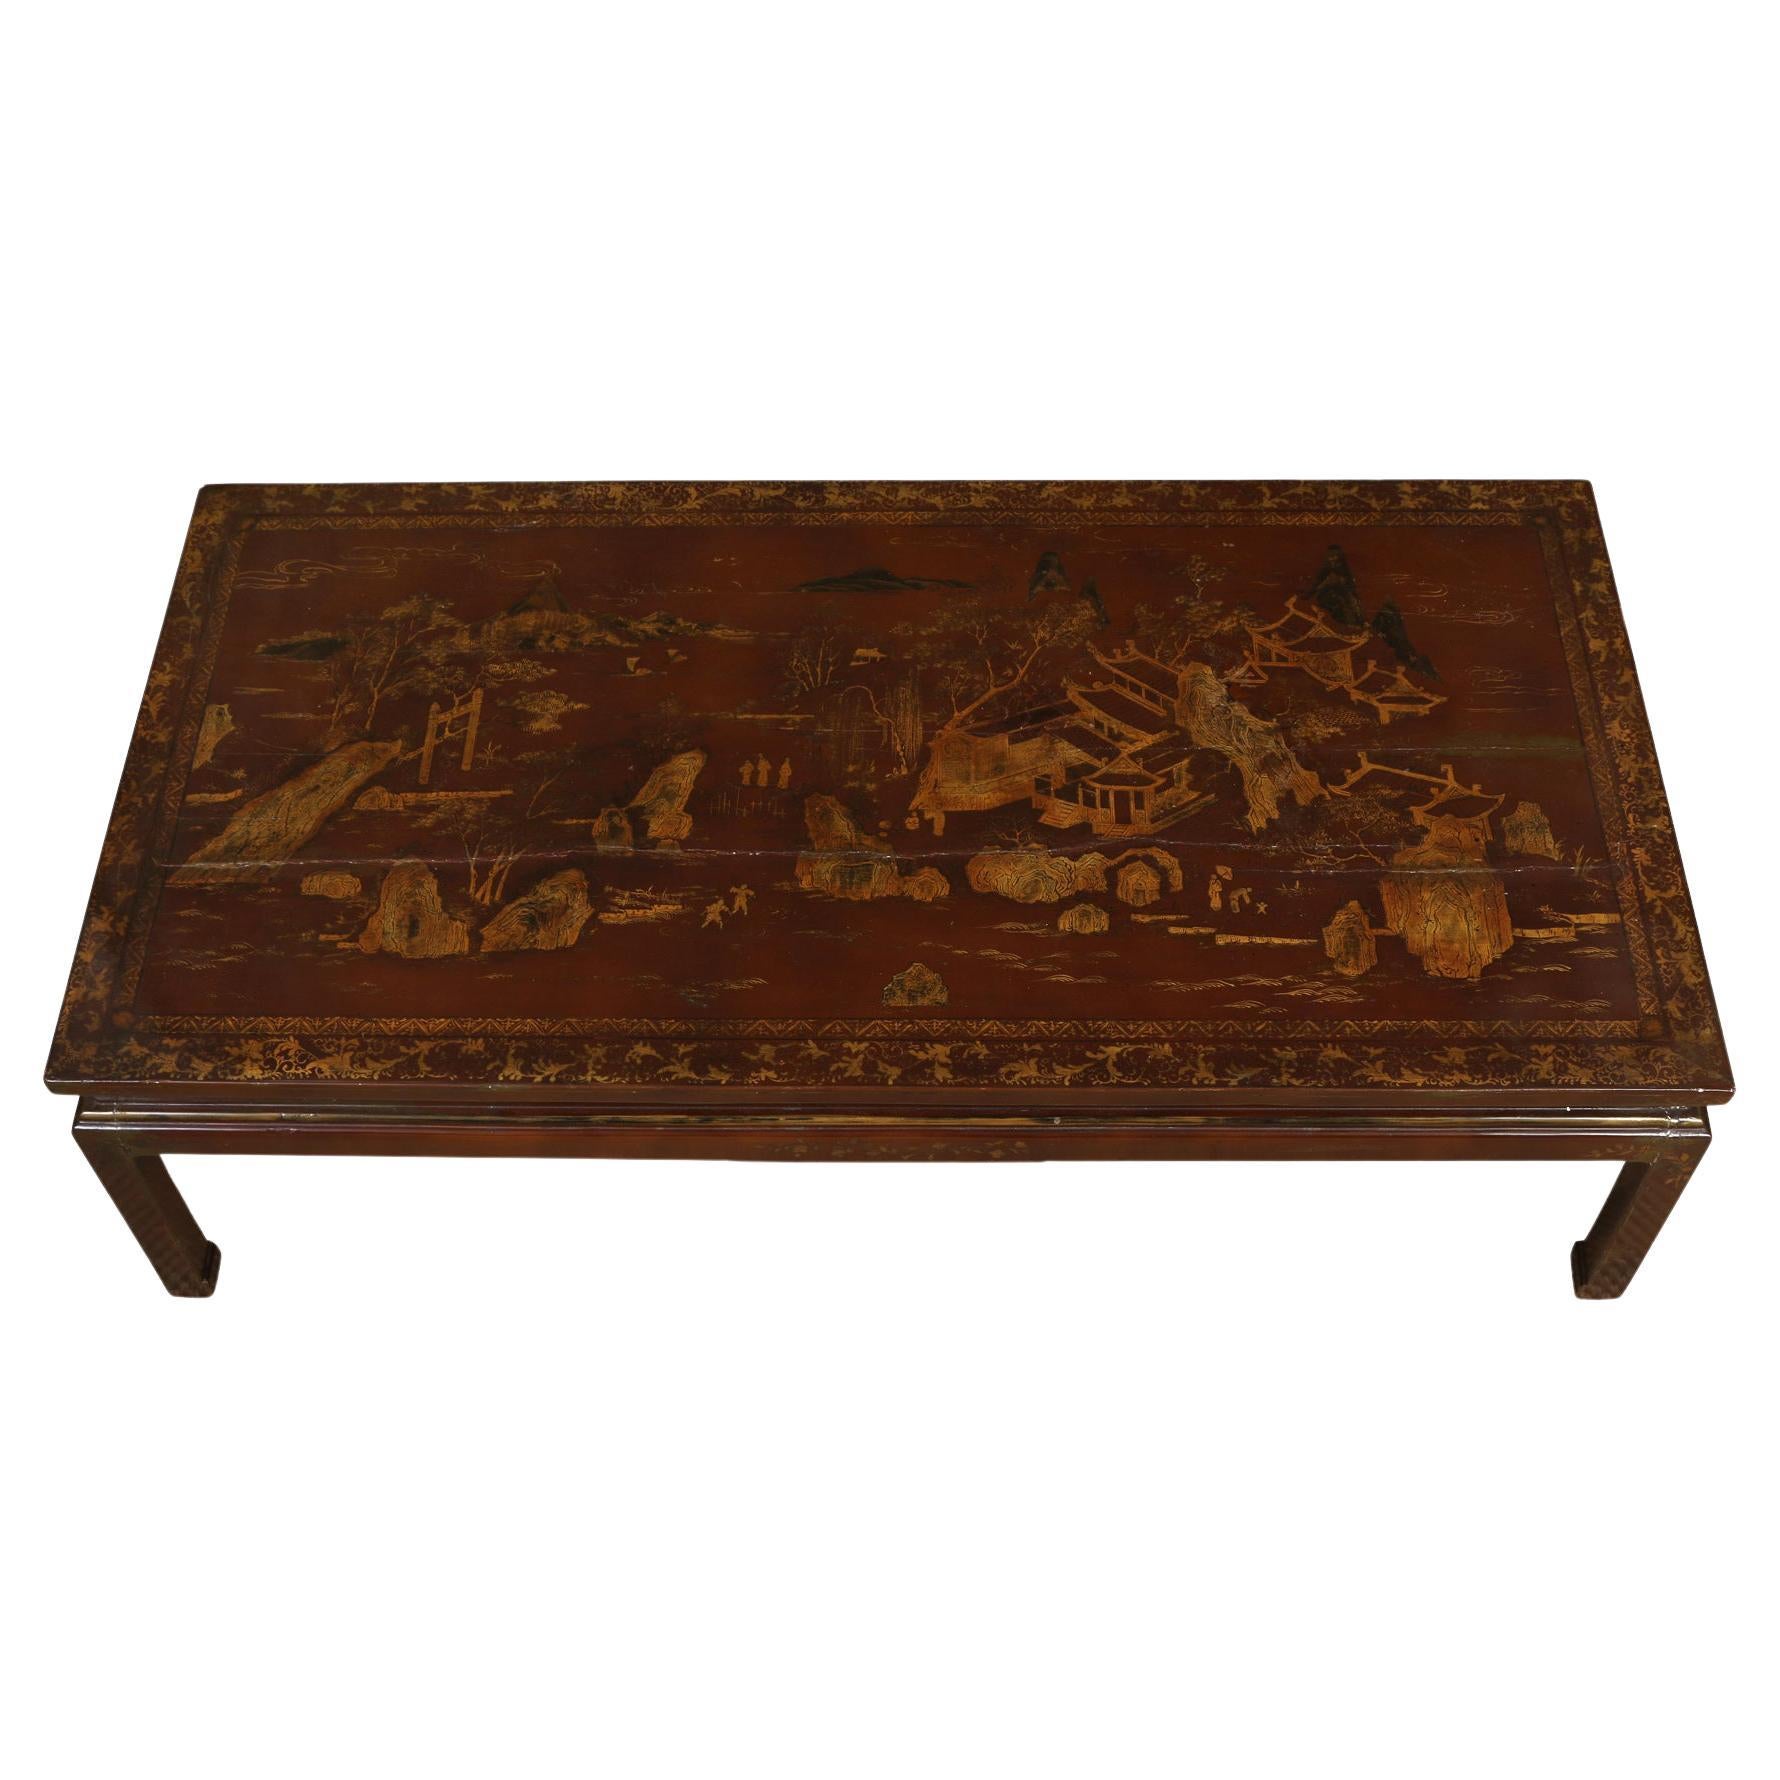 Gilt Decorated Asian Coffee Table